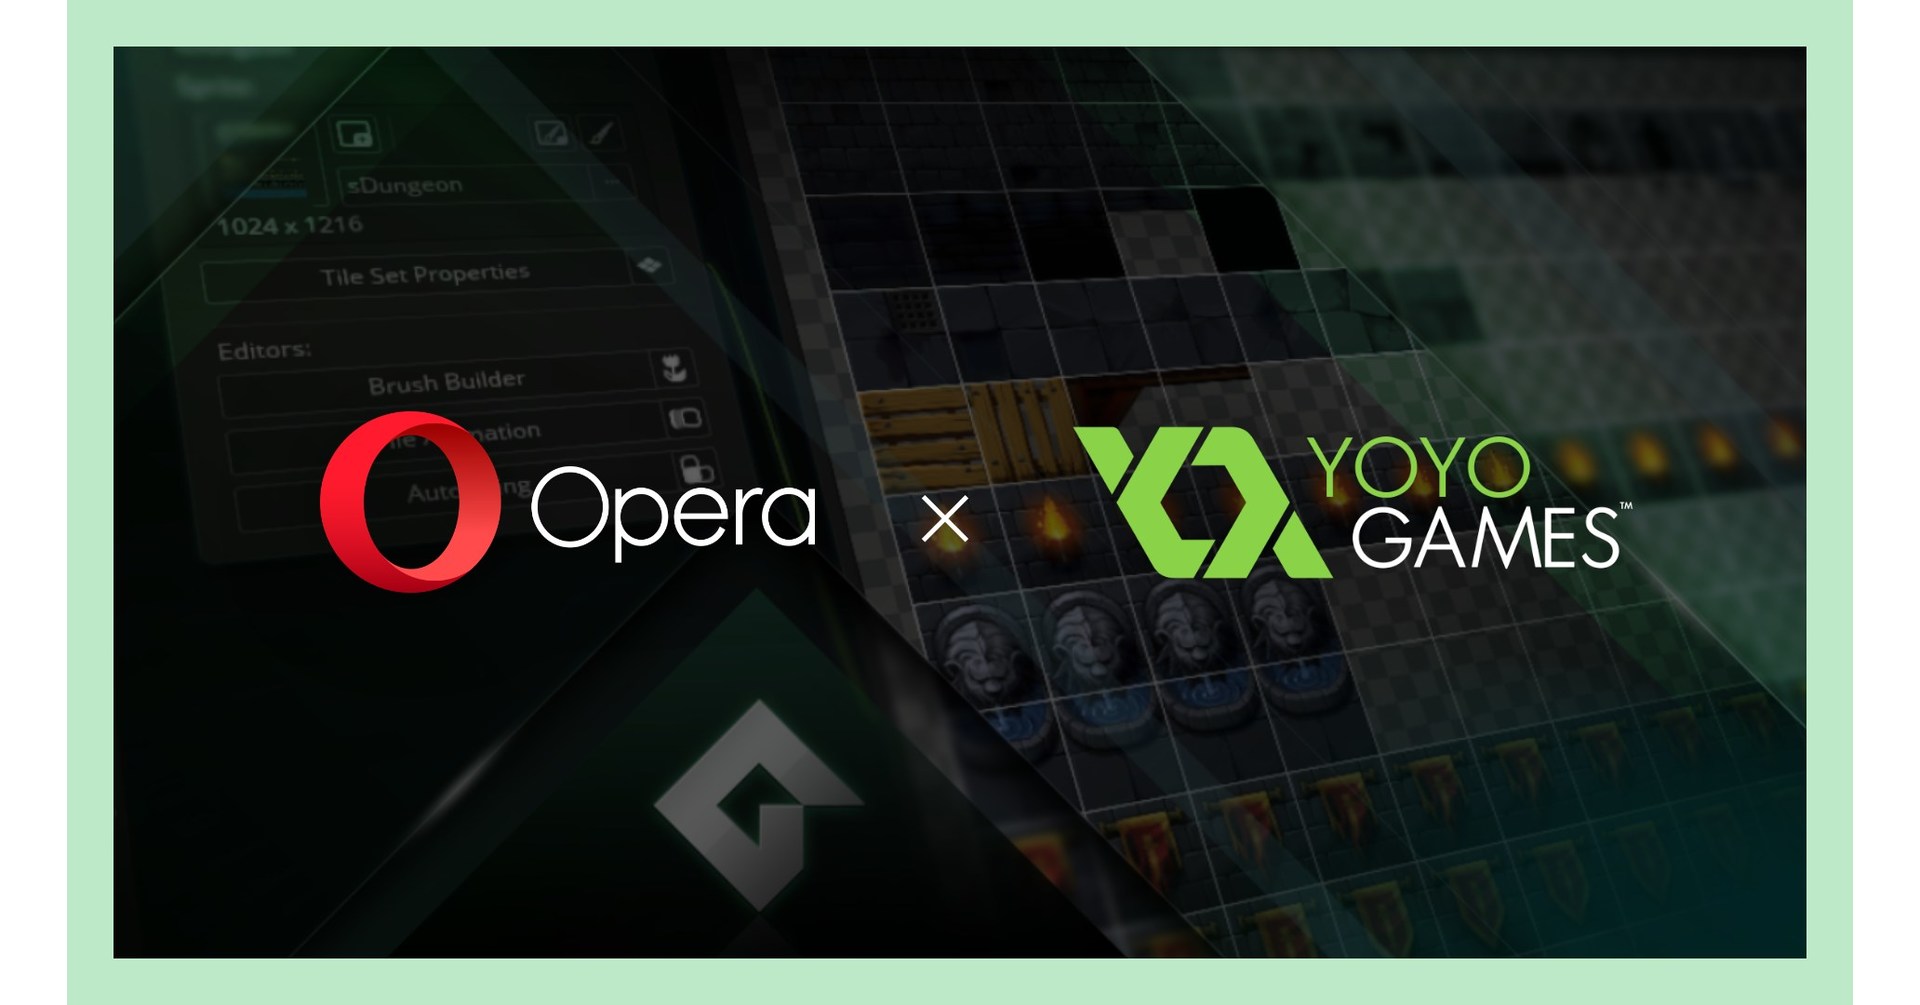 Opera opens new video game division and confirms YoYo Games purchase